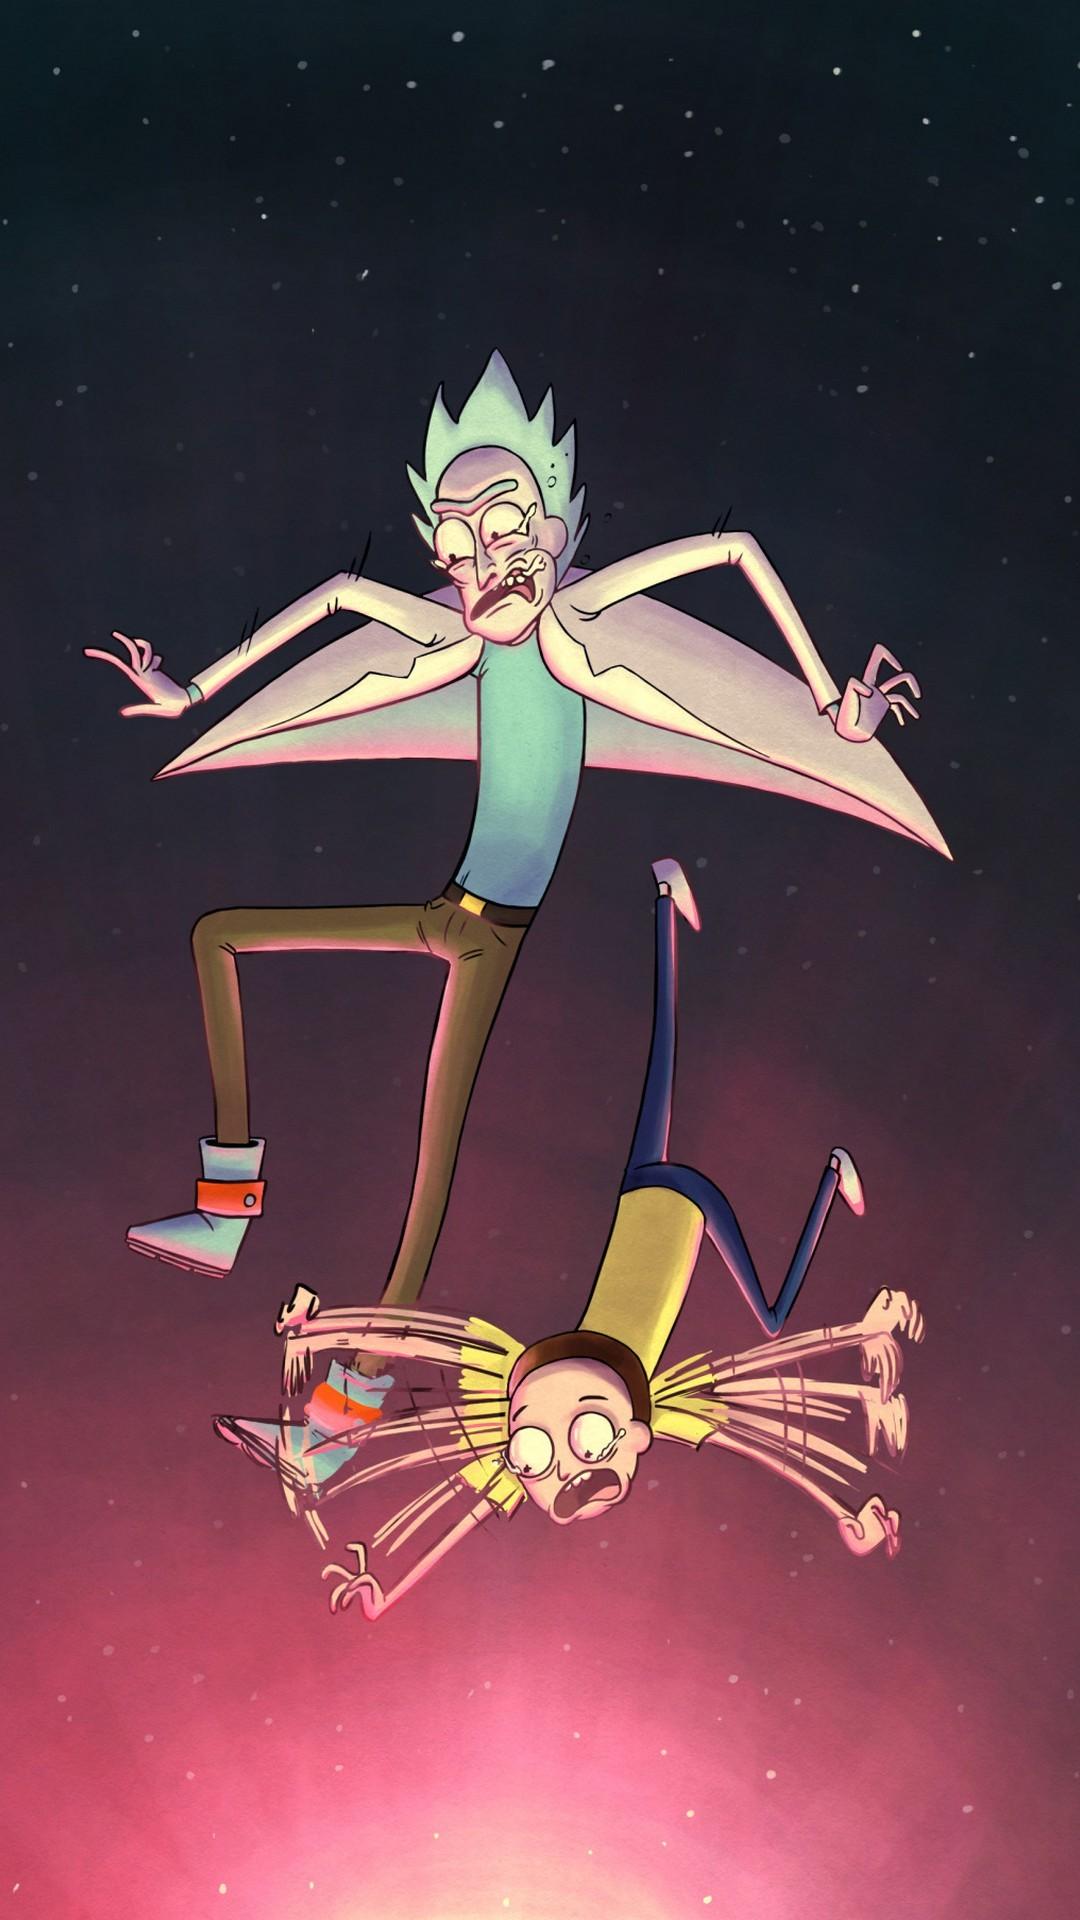 MORTY WALLPAPER FOR PHONE